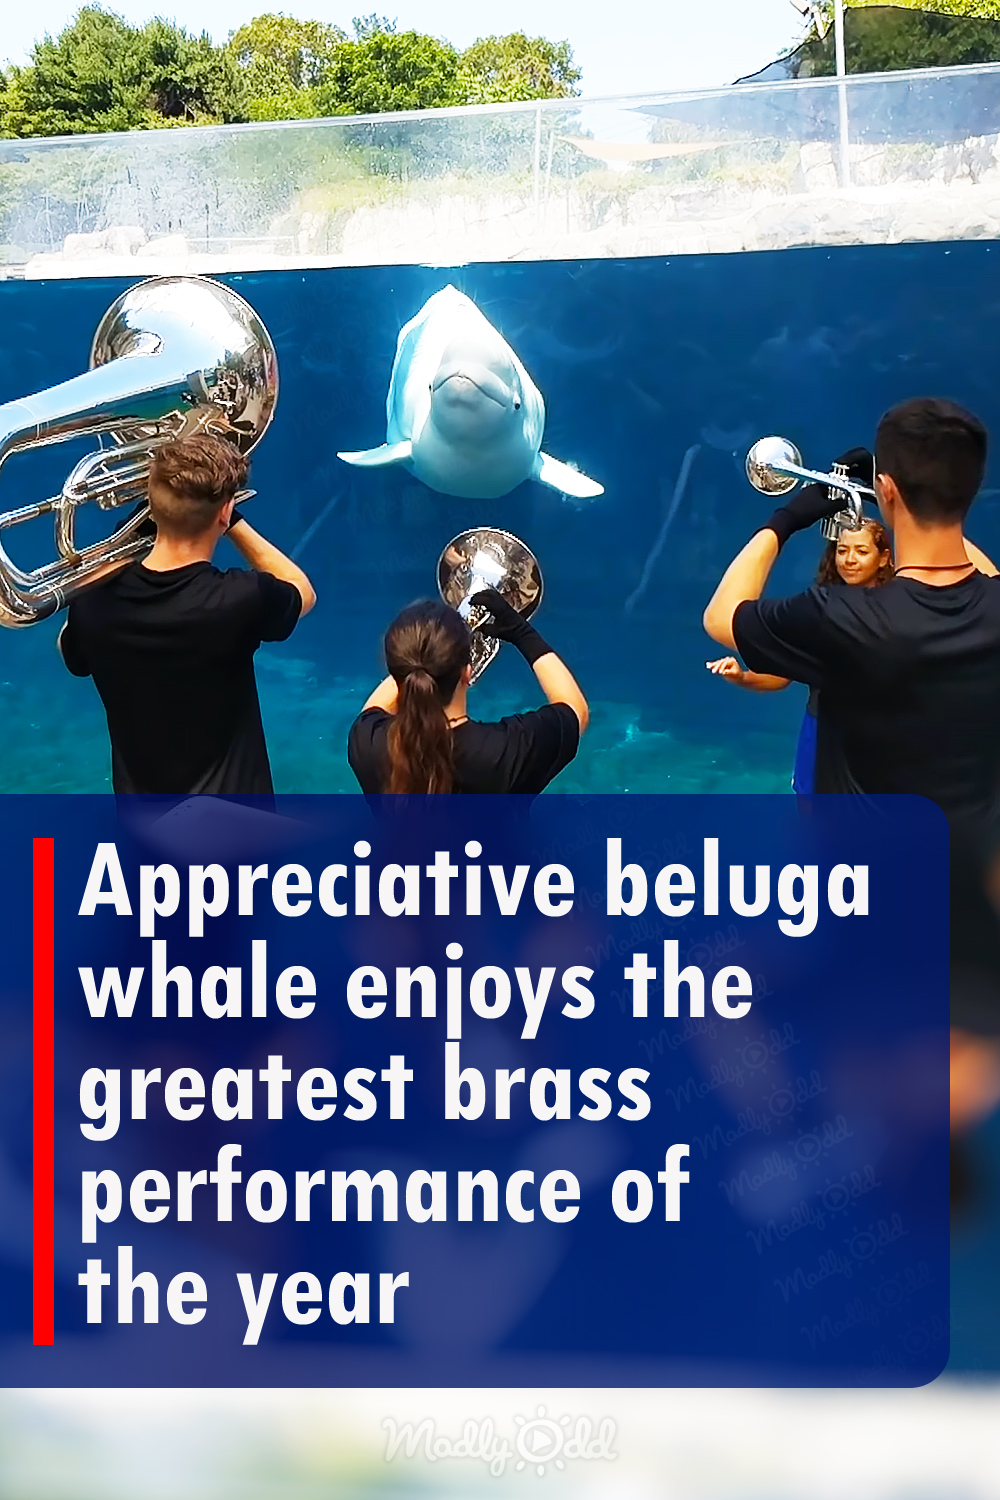 Appreciative beluga whale enjoys the greatest brass performance of the year